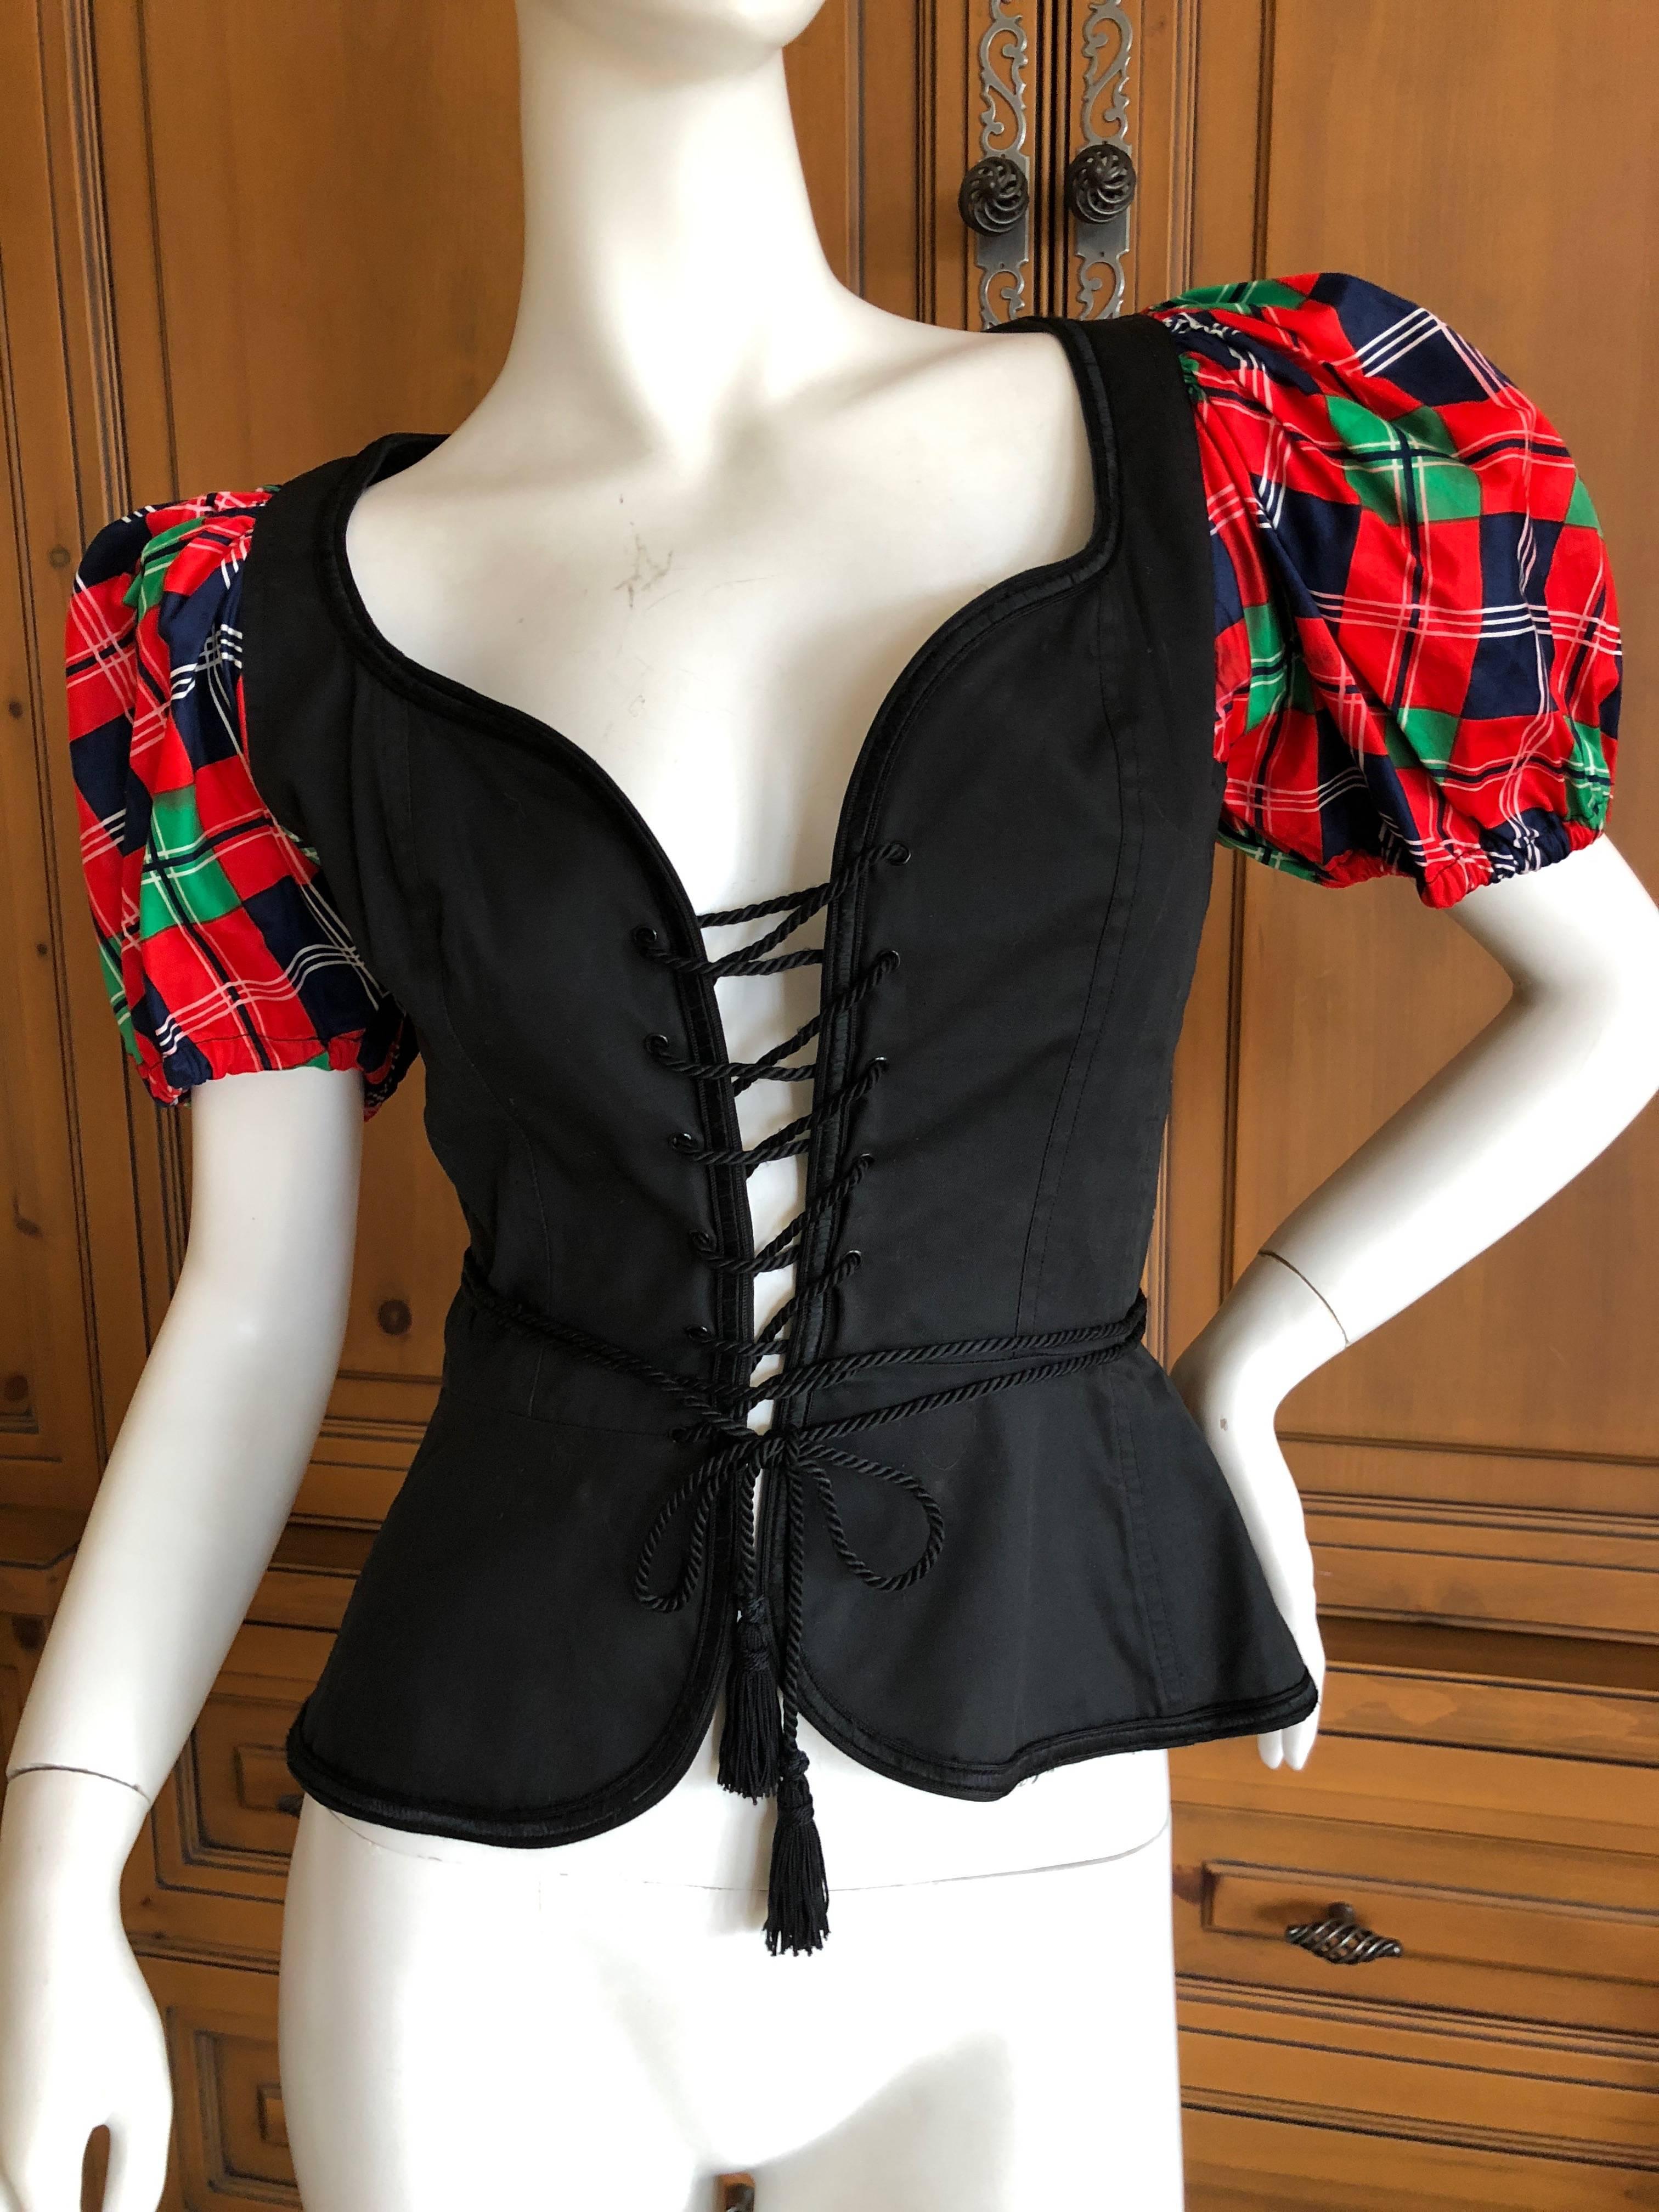 Yves Saint Laurent Rive Gauche 1970's Corset Lace Peasant Top.
The corset lace peasant top has been a signature YSL Style since the beginning of the house.
This is a very early example of the corset lace peasant top, with plaid silk sleeves.
Sz